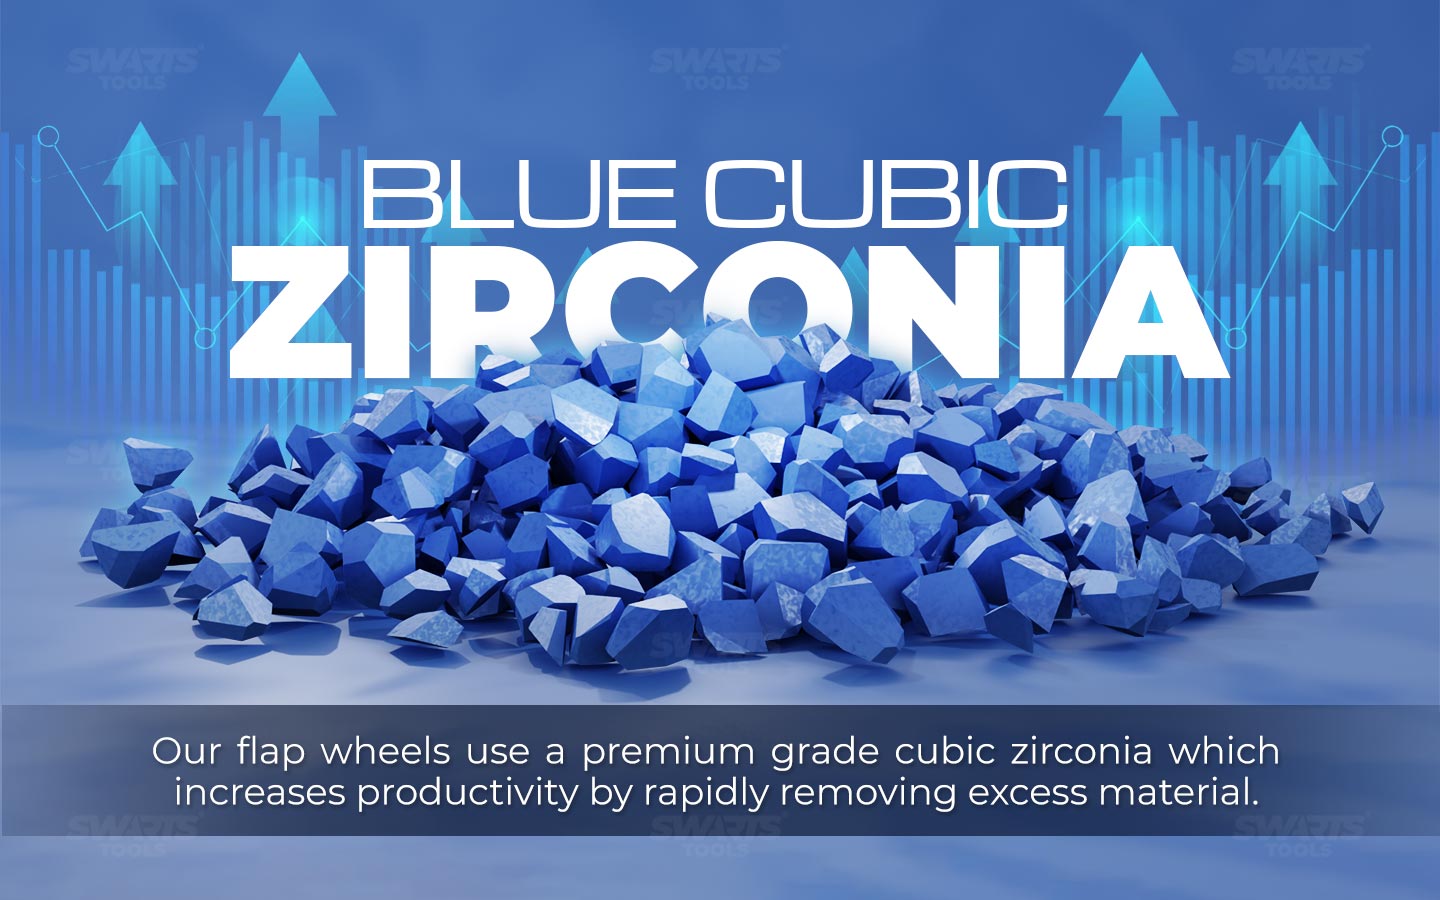 made from premium grade blue cubic zirconia, increases productivity by rapidly removing excess material